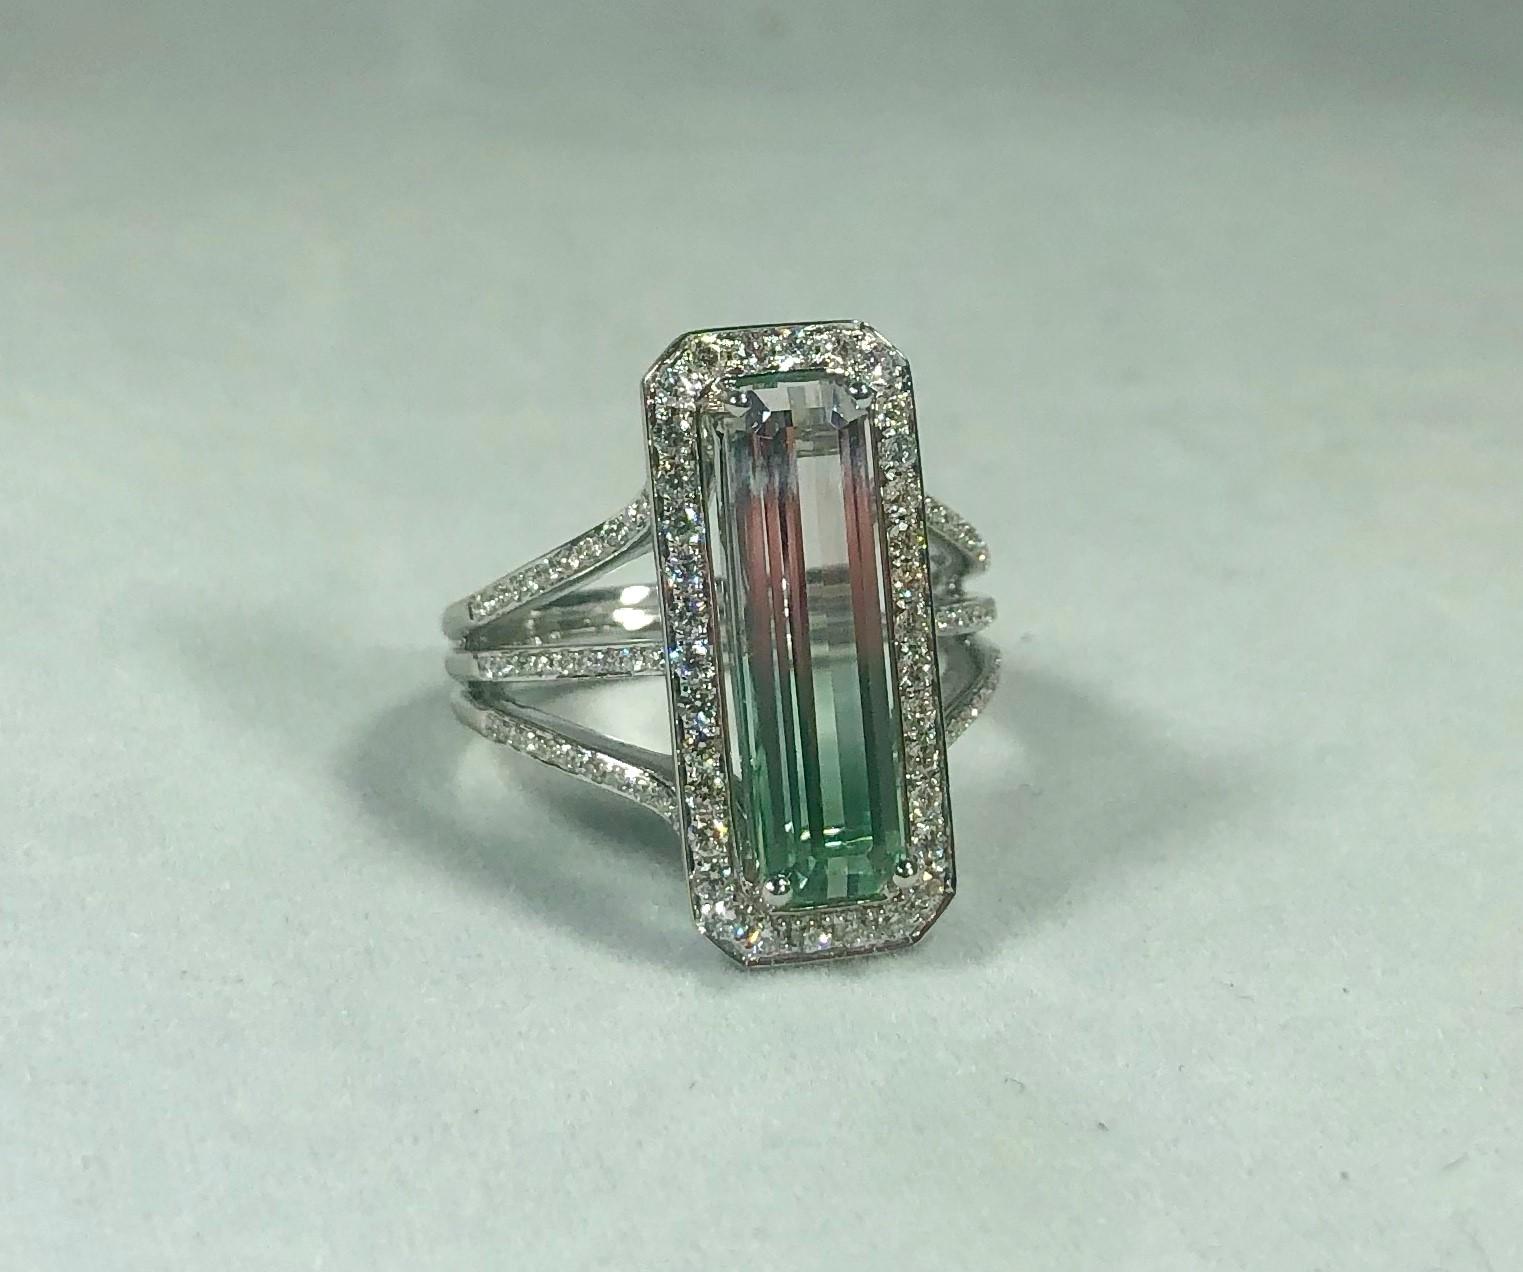 Philip Zahm 18 KT 3.64 CT Bi-color Tourmaline Diamond Dinner Ring. Afghan, 3.64 carat pink and green bi-color tourmaline, elongated emerald-cut center, set north-south (measurements 5.13 by 17.68). Diamond accents surround center stone, running down